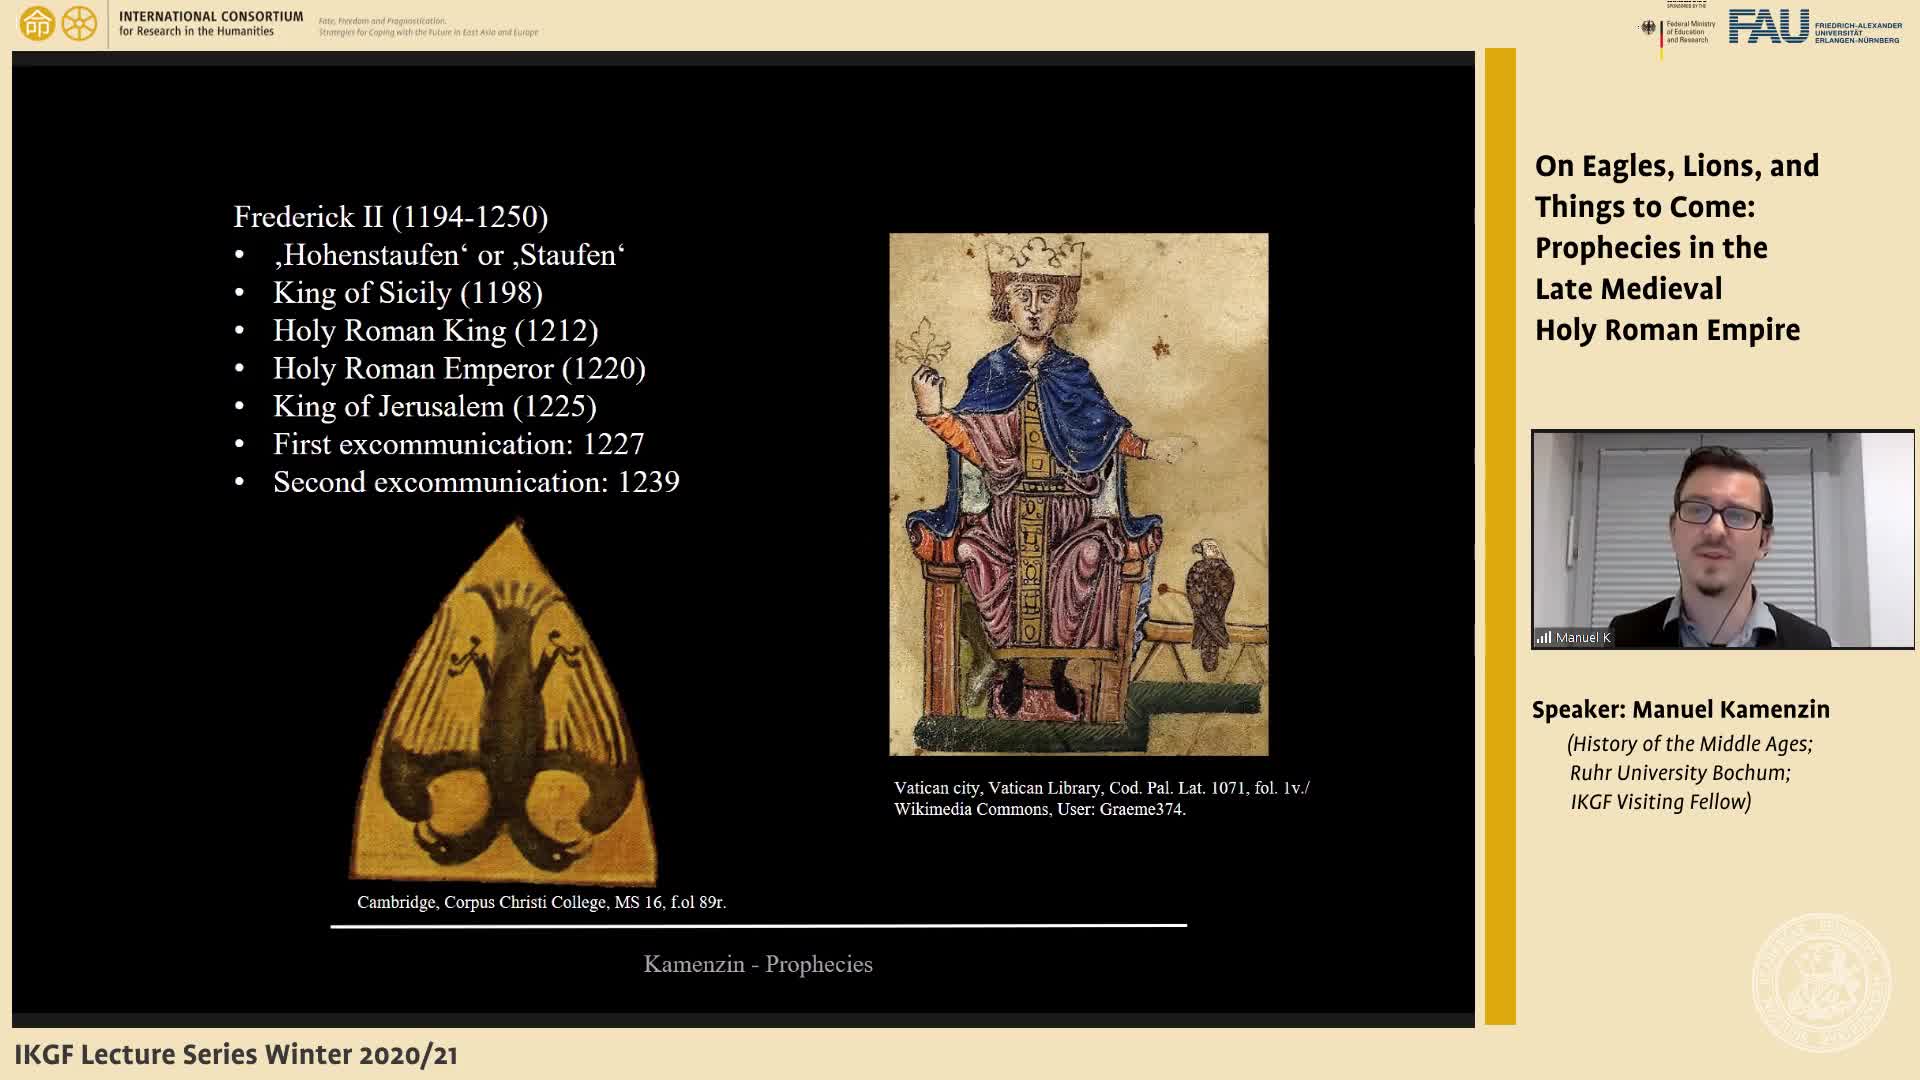 On Eagles, Lions, and Things to Come: Prophecies in the Late Medieval Holy Roman Empire preview image